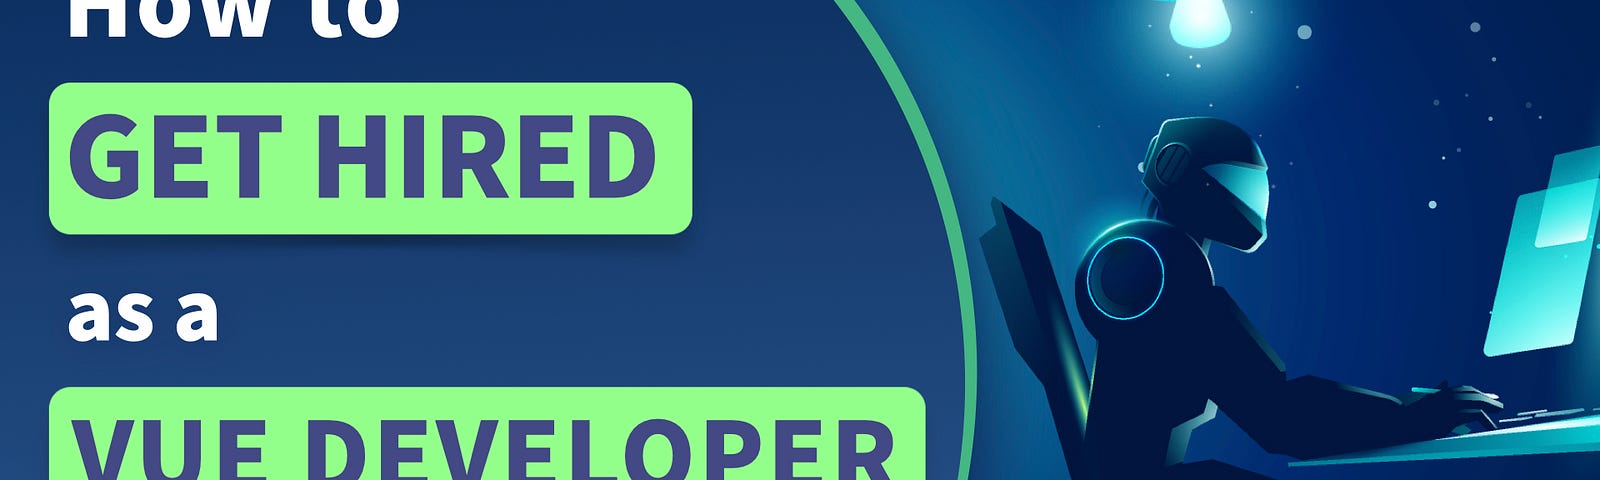 How to get hired as a Vue developer